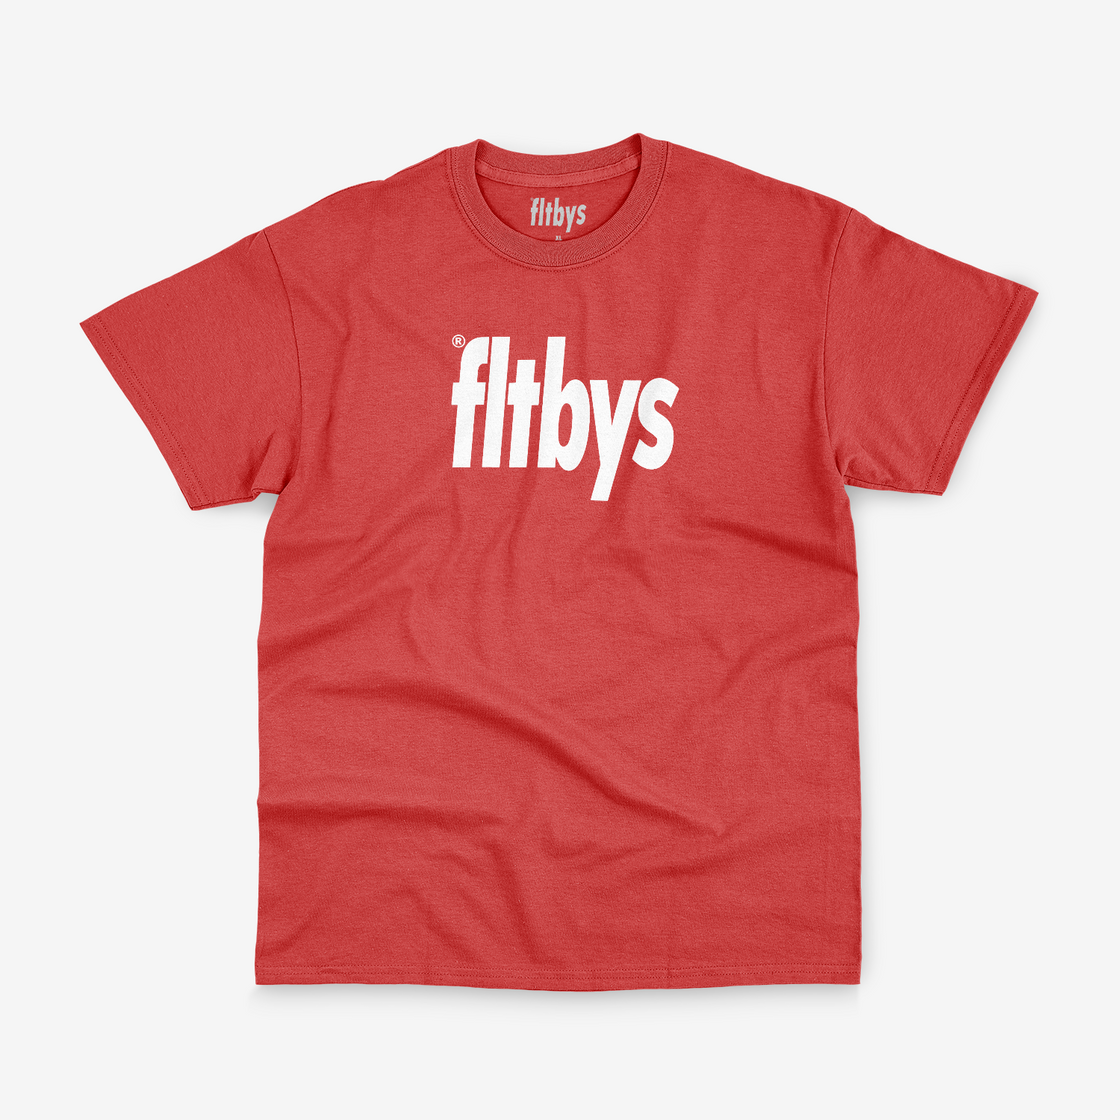 FLTBYS Classic Tee - Red